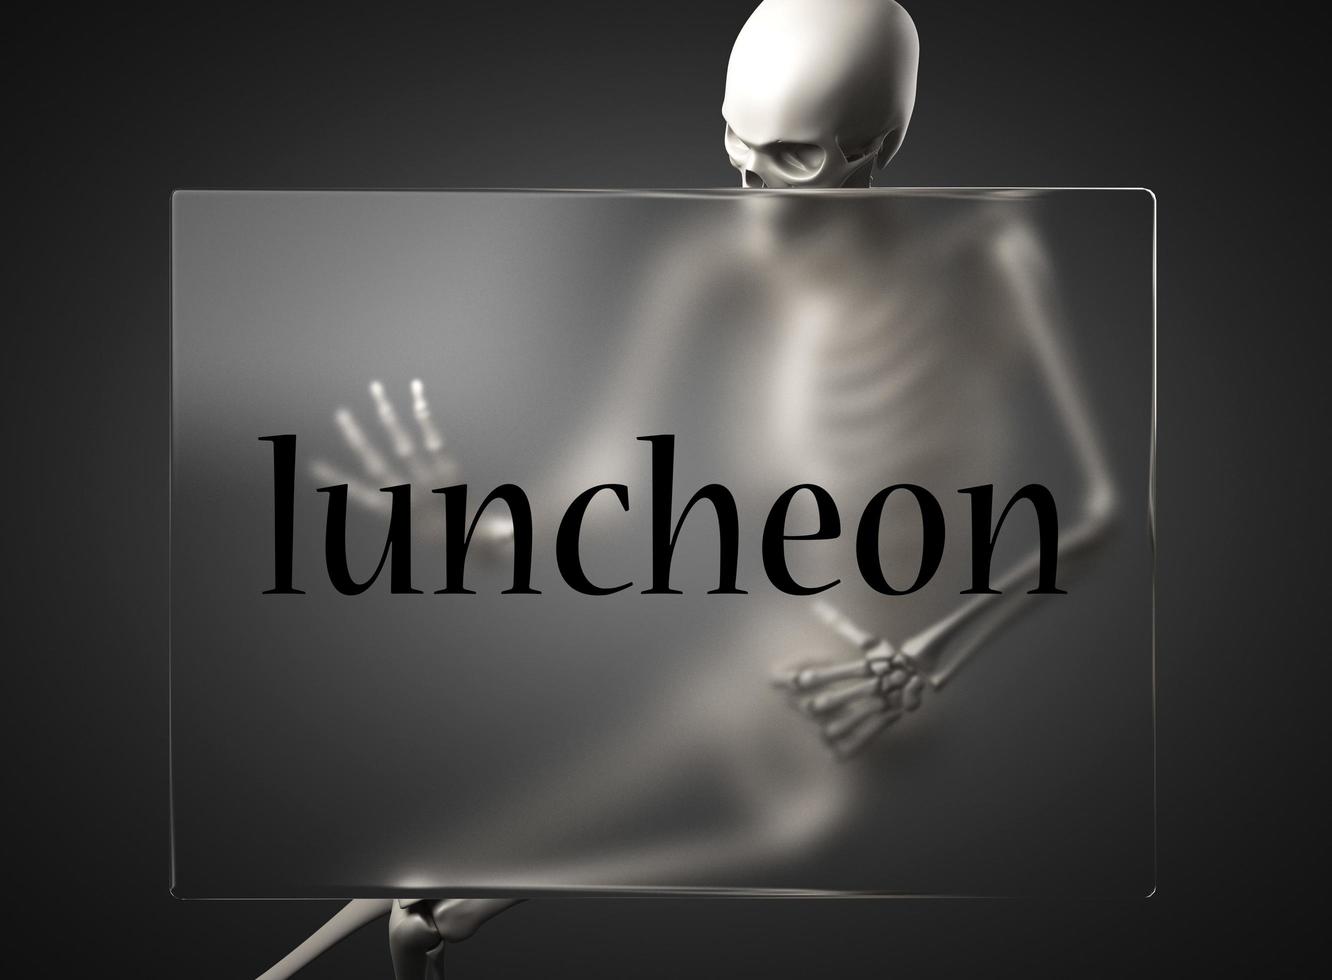 luncheon word on glass and skeleton photo